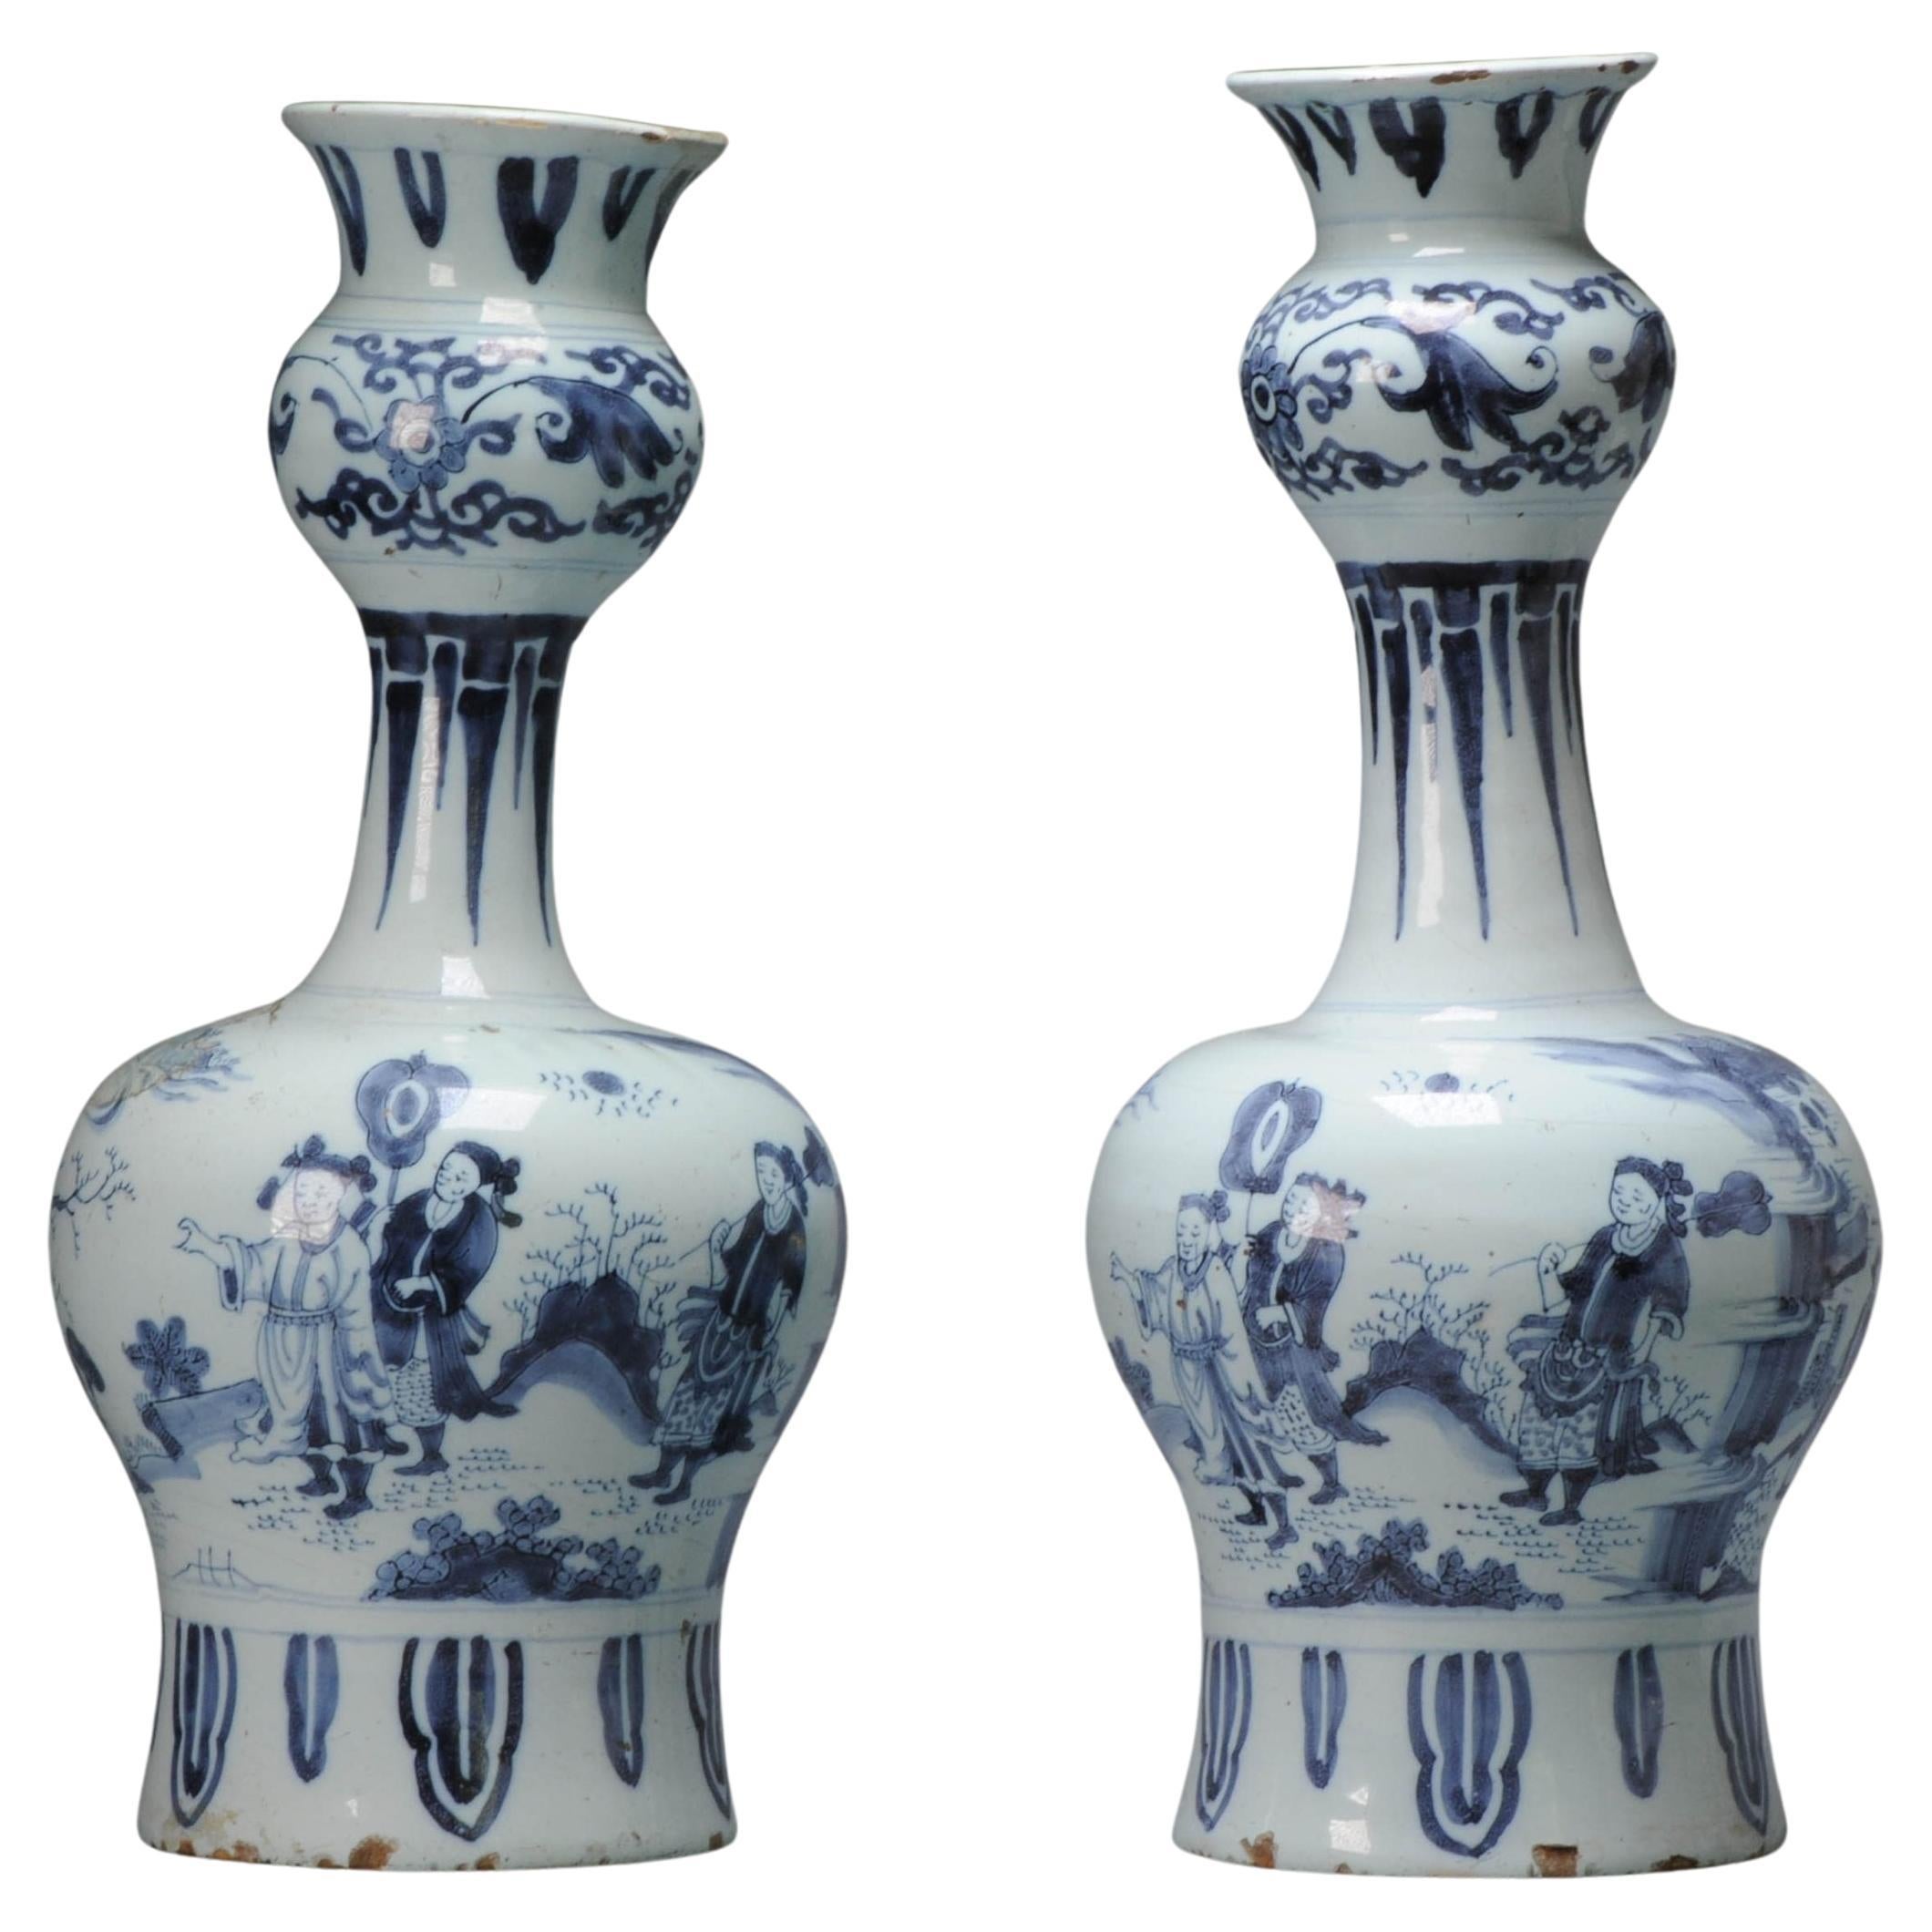 Unusual Dutch Delftware Figural Earthenware Vases in Chinese Transitional Style For Sale